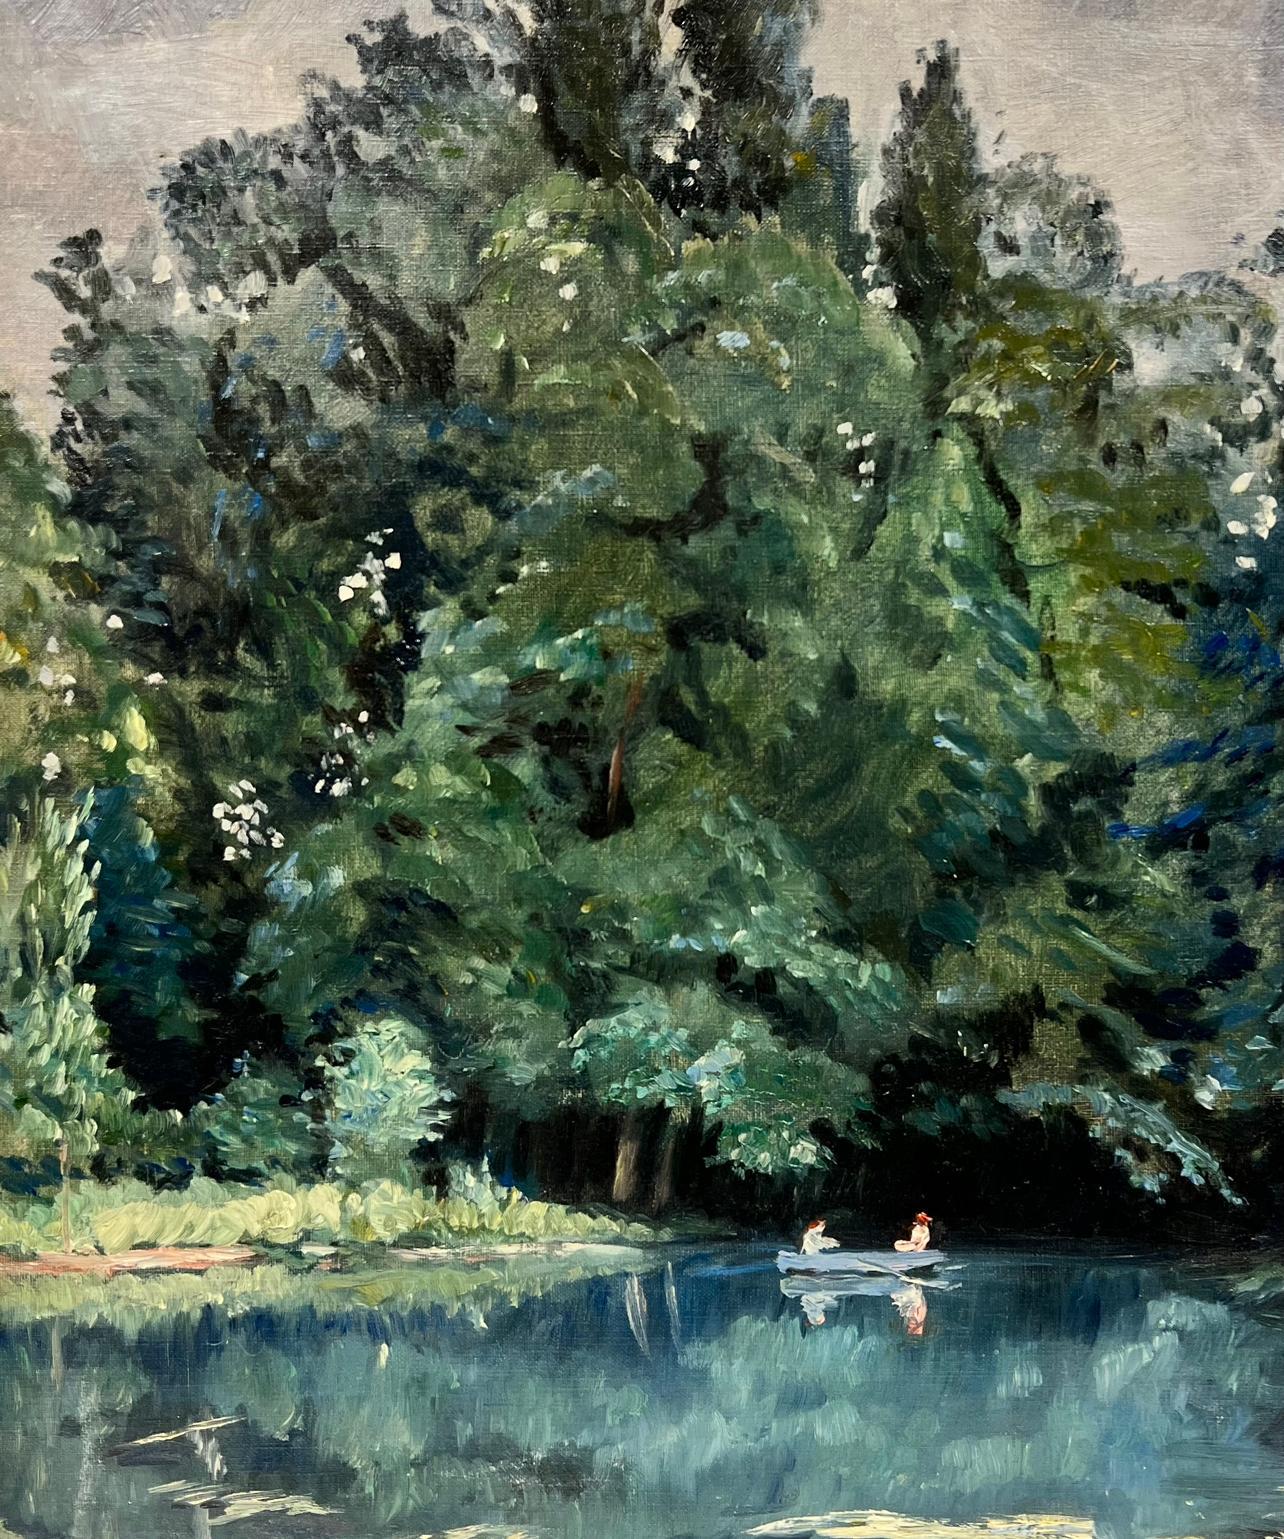 Artist/ School: French School early 20th century, signed 'Guy Rose' to the lower left corner. 

Title: Couple in a rowing boat on a lake within a landscape; very atnmospheric work with sludgy green moody and atmospheric colors to it. 

Medium: oil